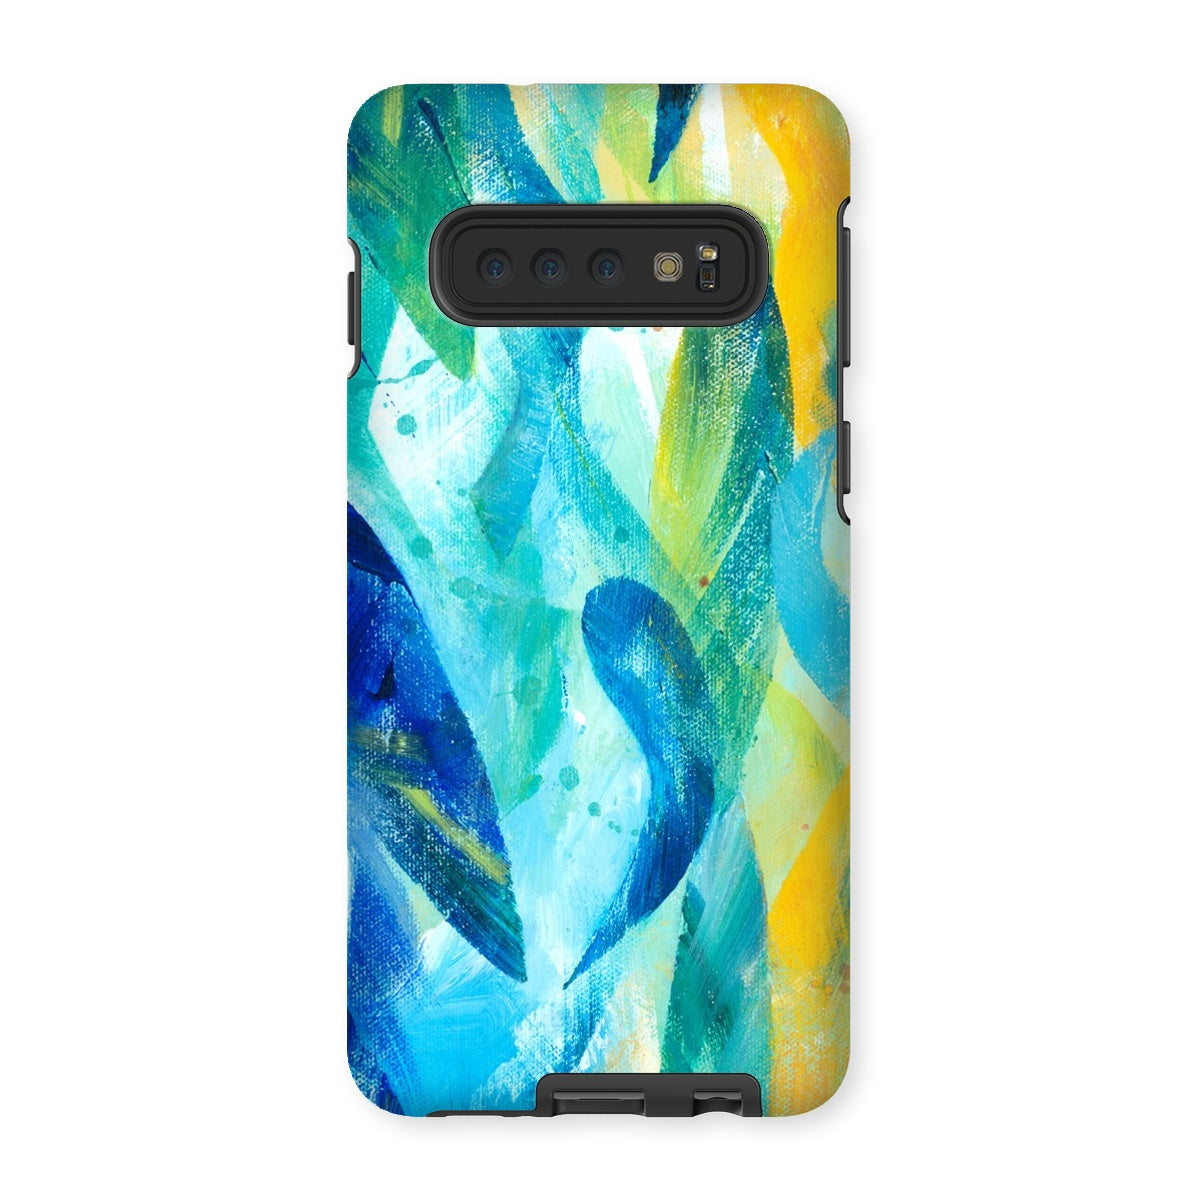 Synergy abstract art mobile phone protective case for iphones and samsung galaxy